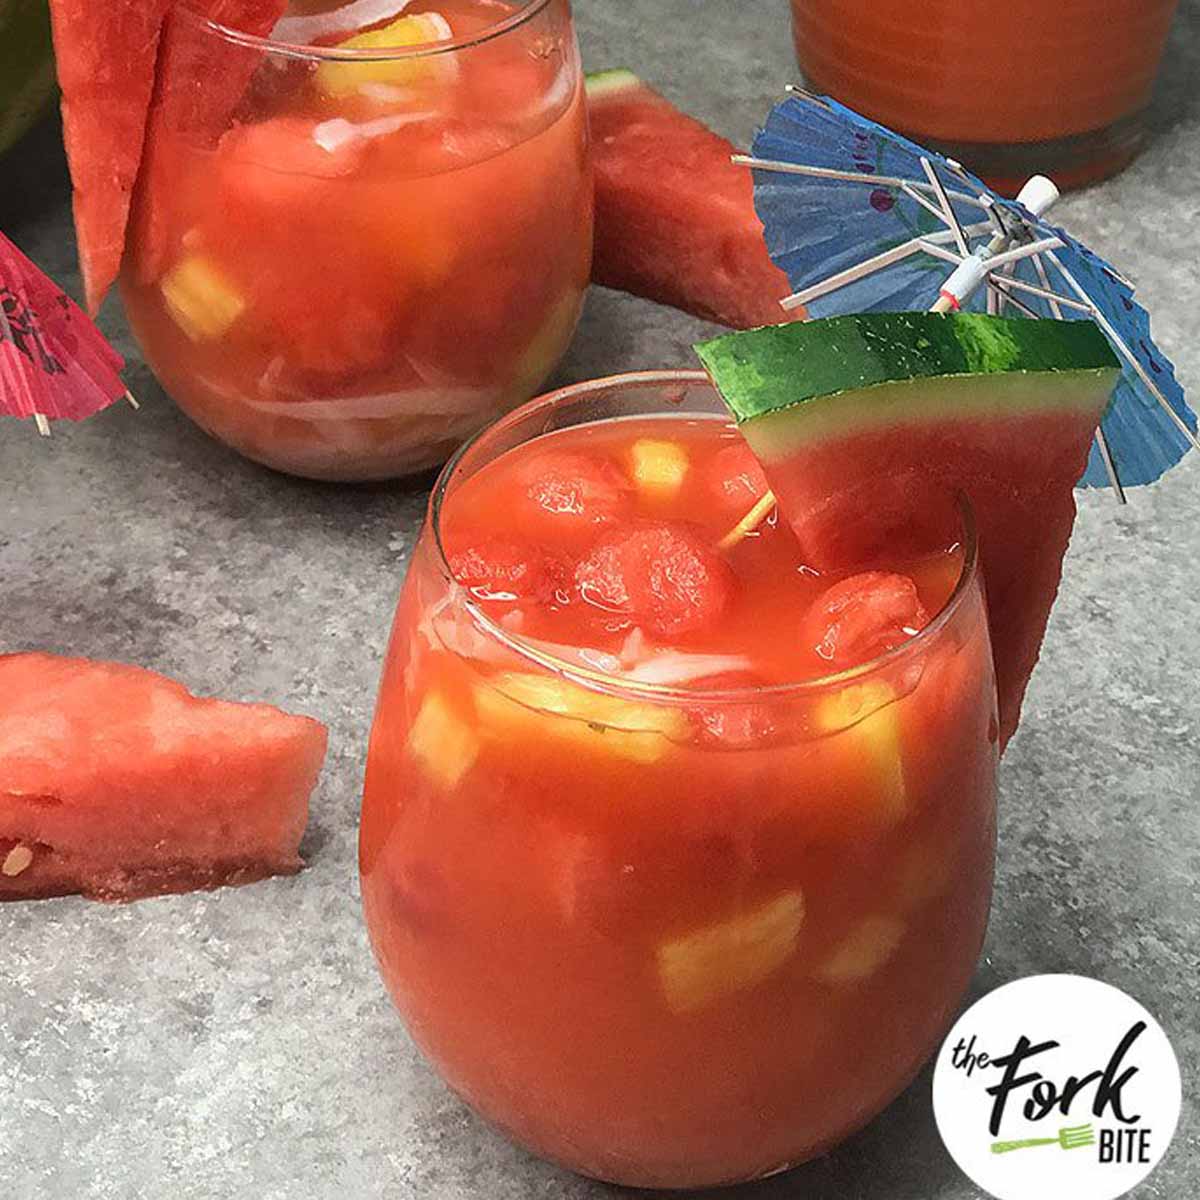 This Watermelon Tropical Fruit Punch is incredibly refreshing and thirst quenching, yet sweet and tangy at the same time. Best of all, it's easy to make.